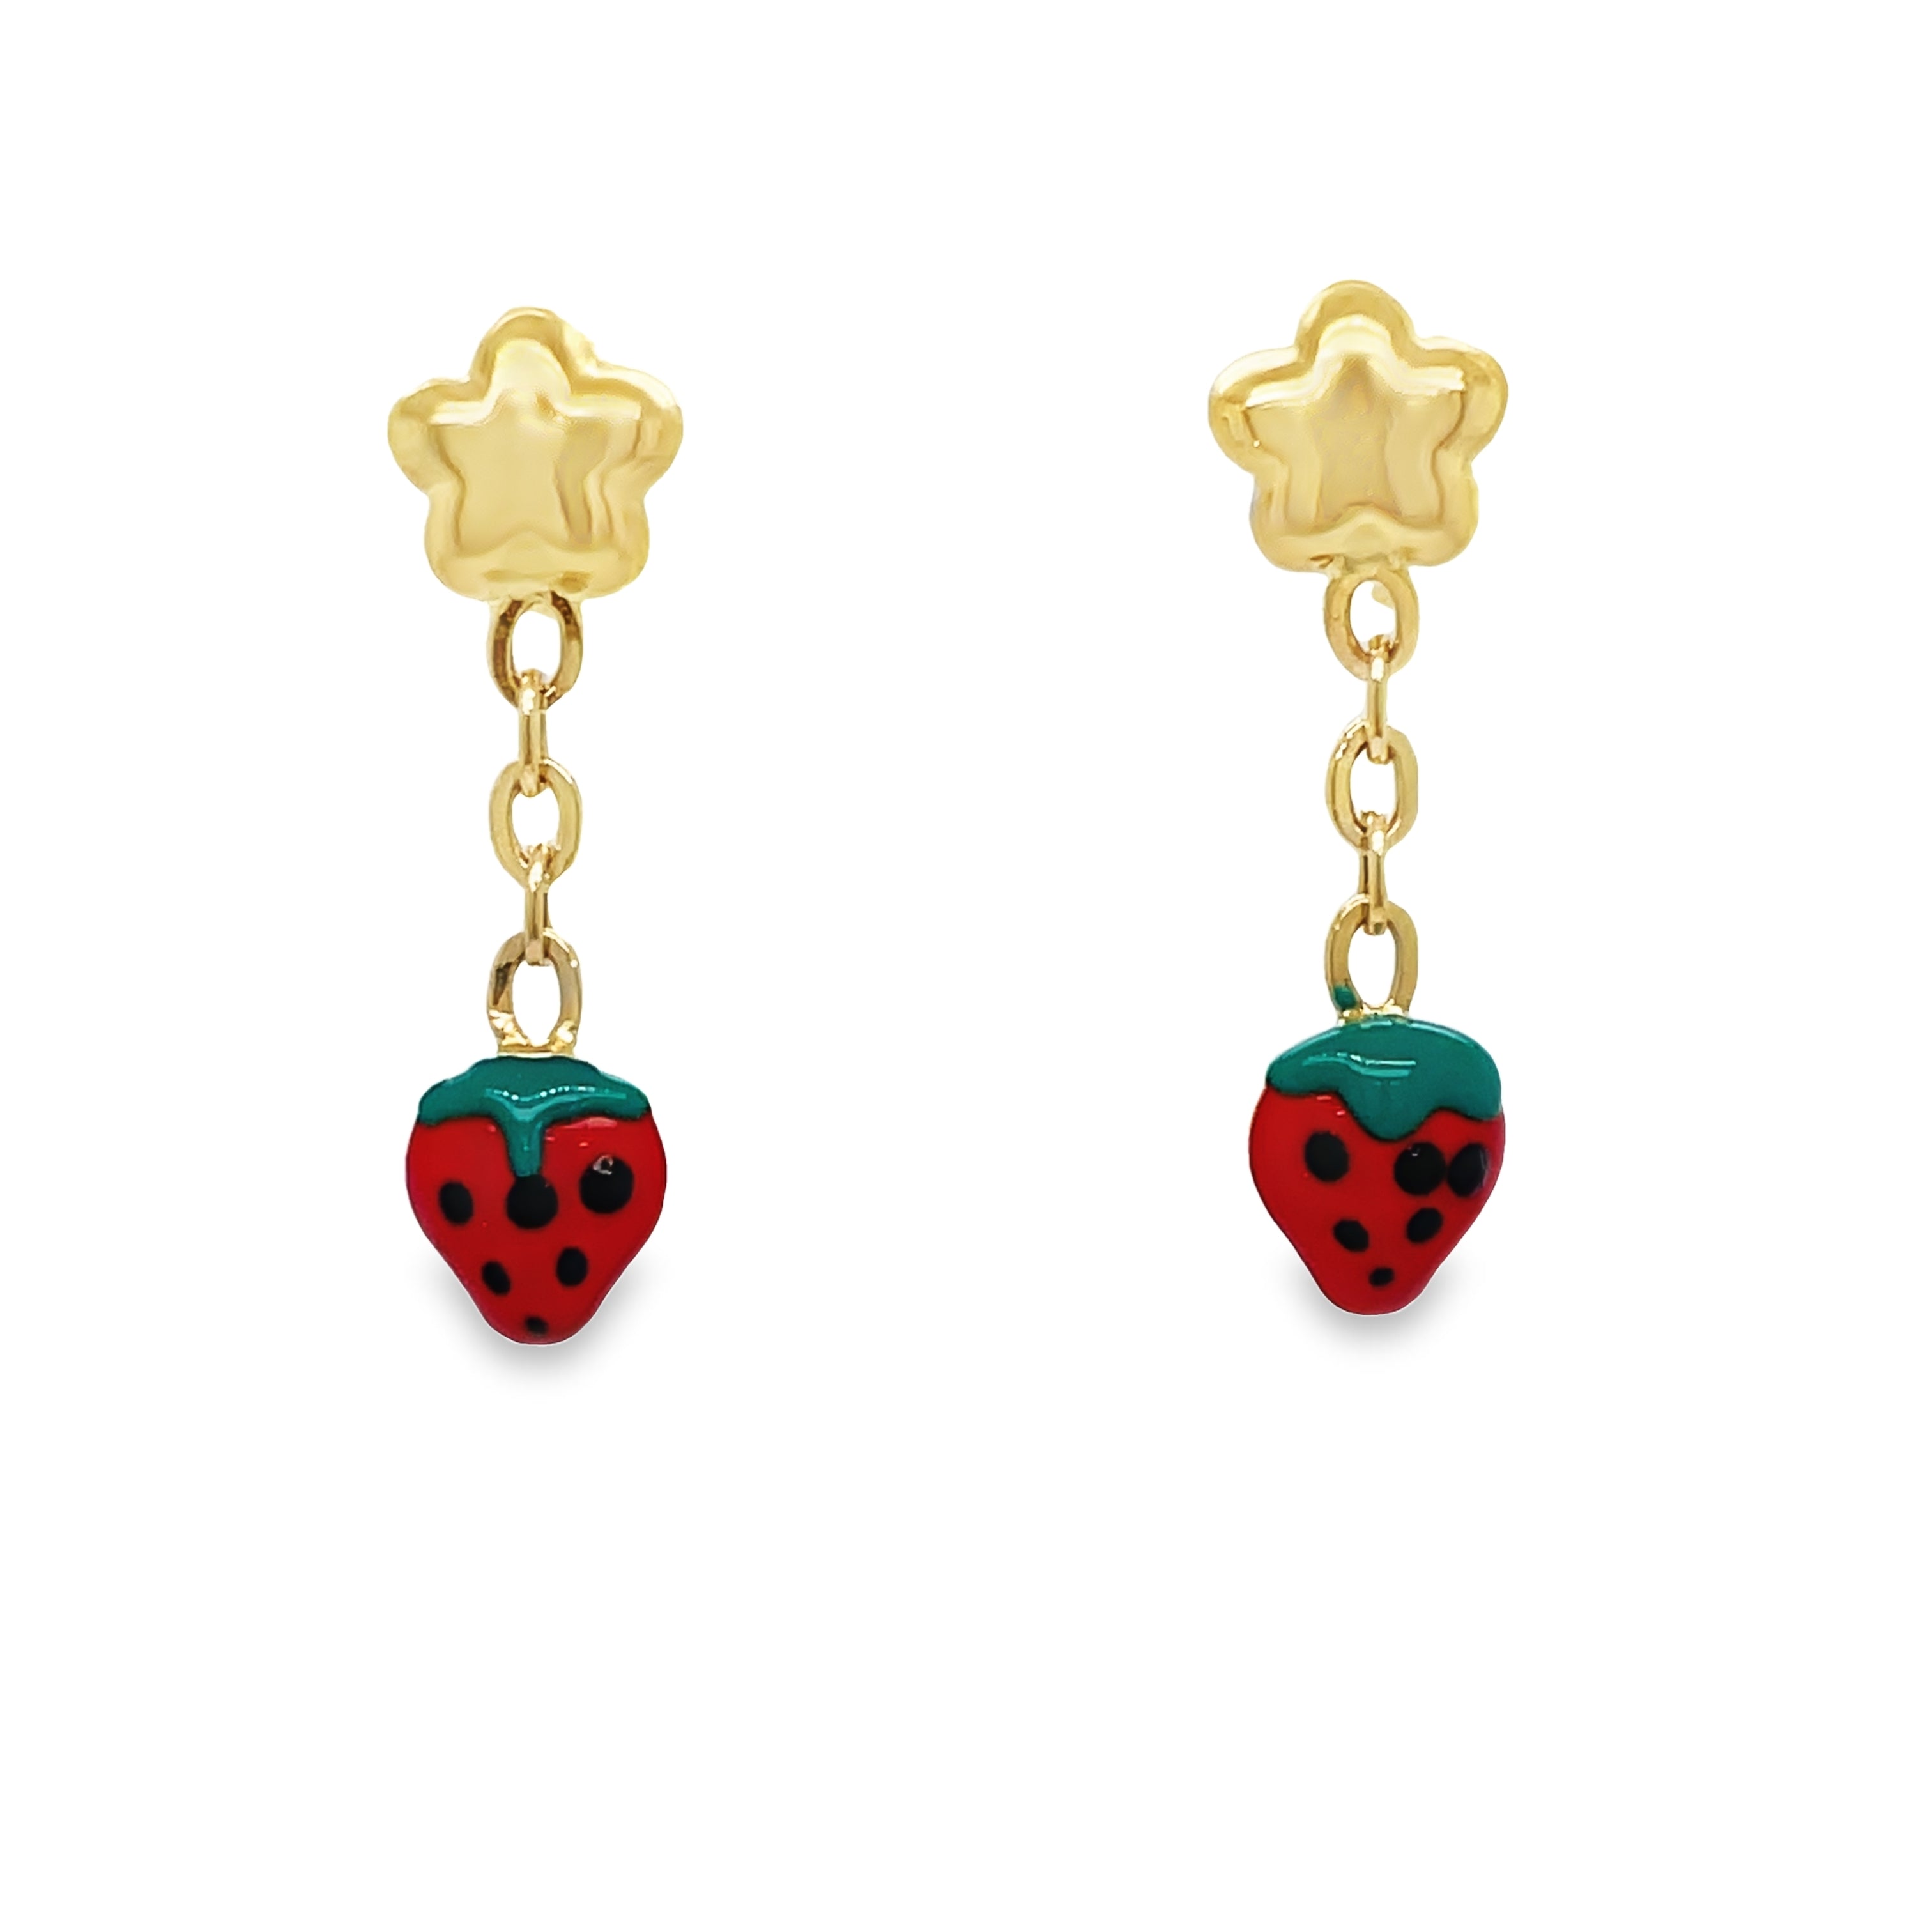 <p><span style="font-size: 0.875rem;">Elegant 14k Gold Dangling Strawberry Baby Earrings with secure friction backs, designed for comfort and superior quality. These earrings feature an enduring 14k Gold construction and are crafted with attention to detail to ensure a safe and comfortable fit.</span><br></p> <p>&nbsp;</p>